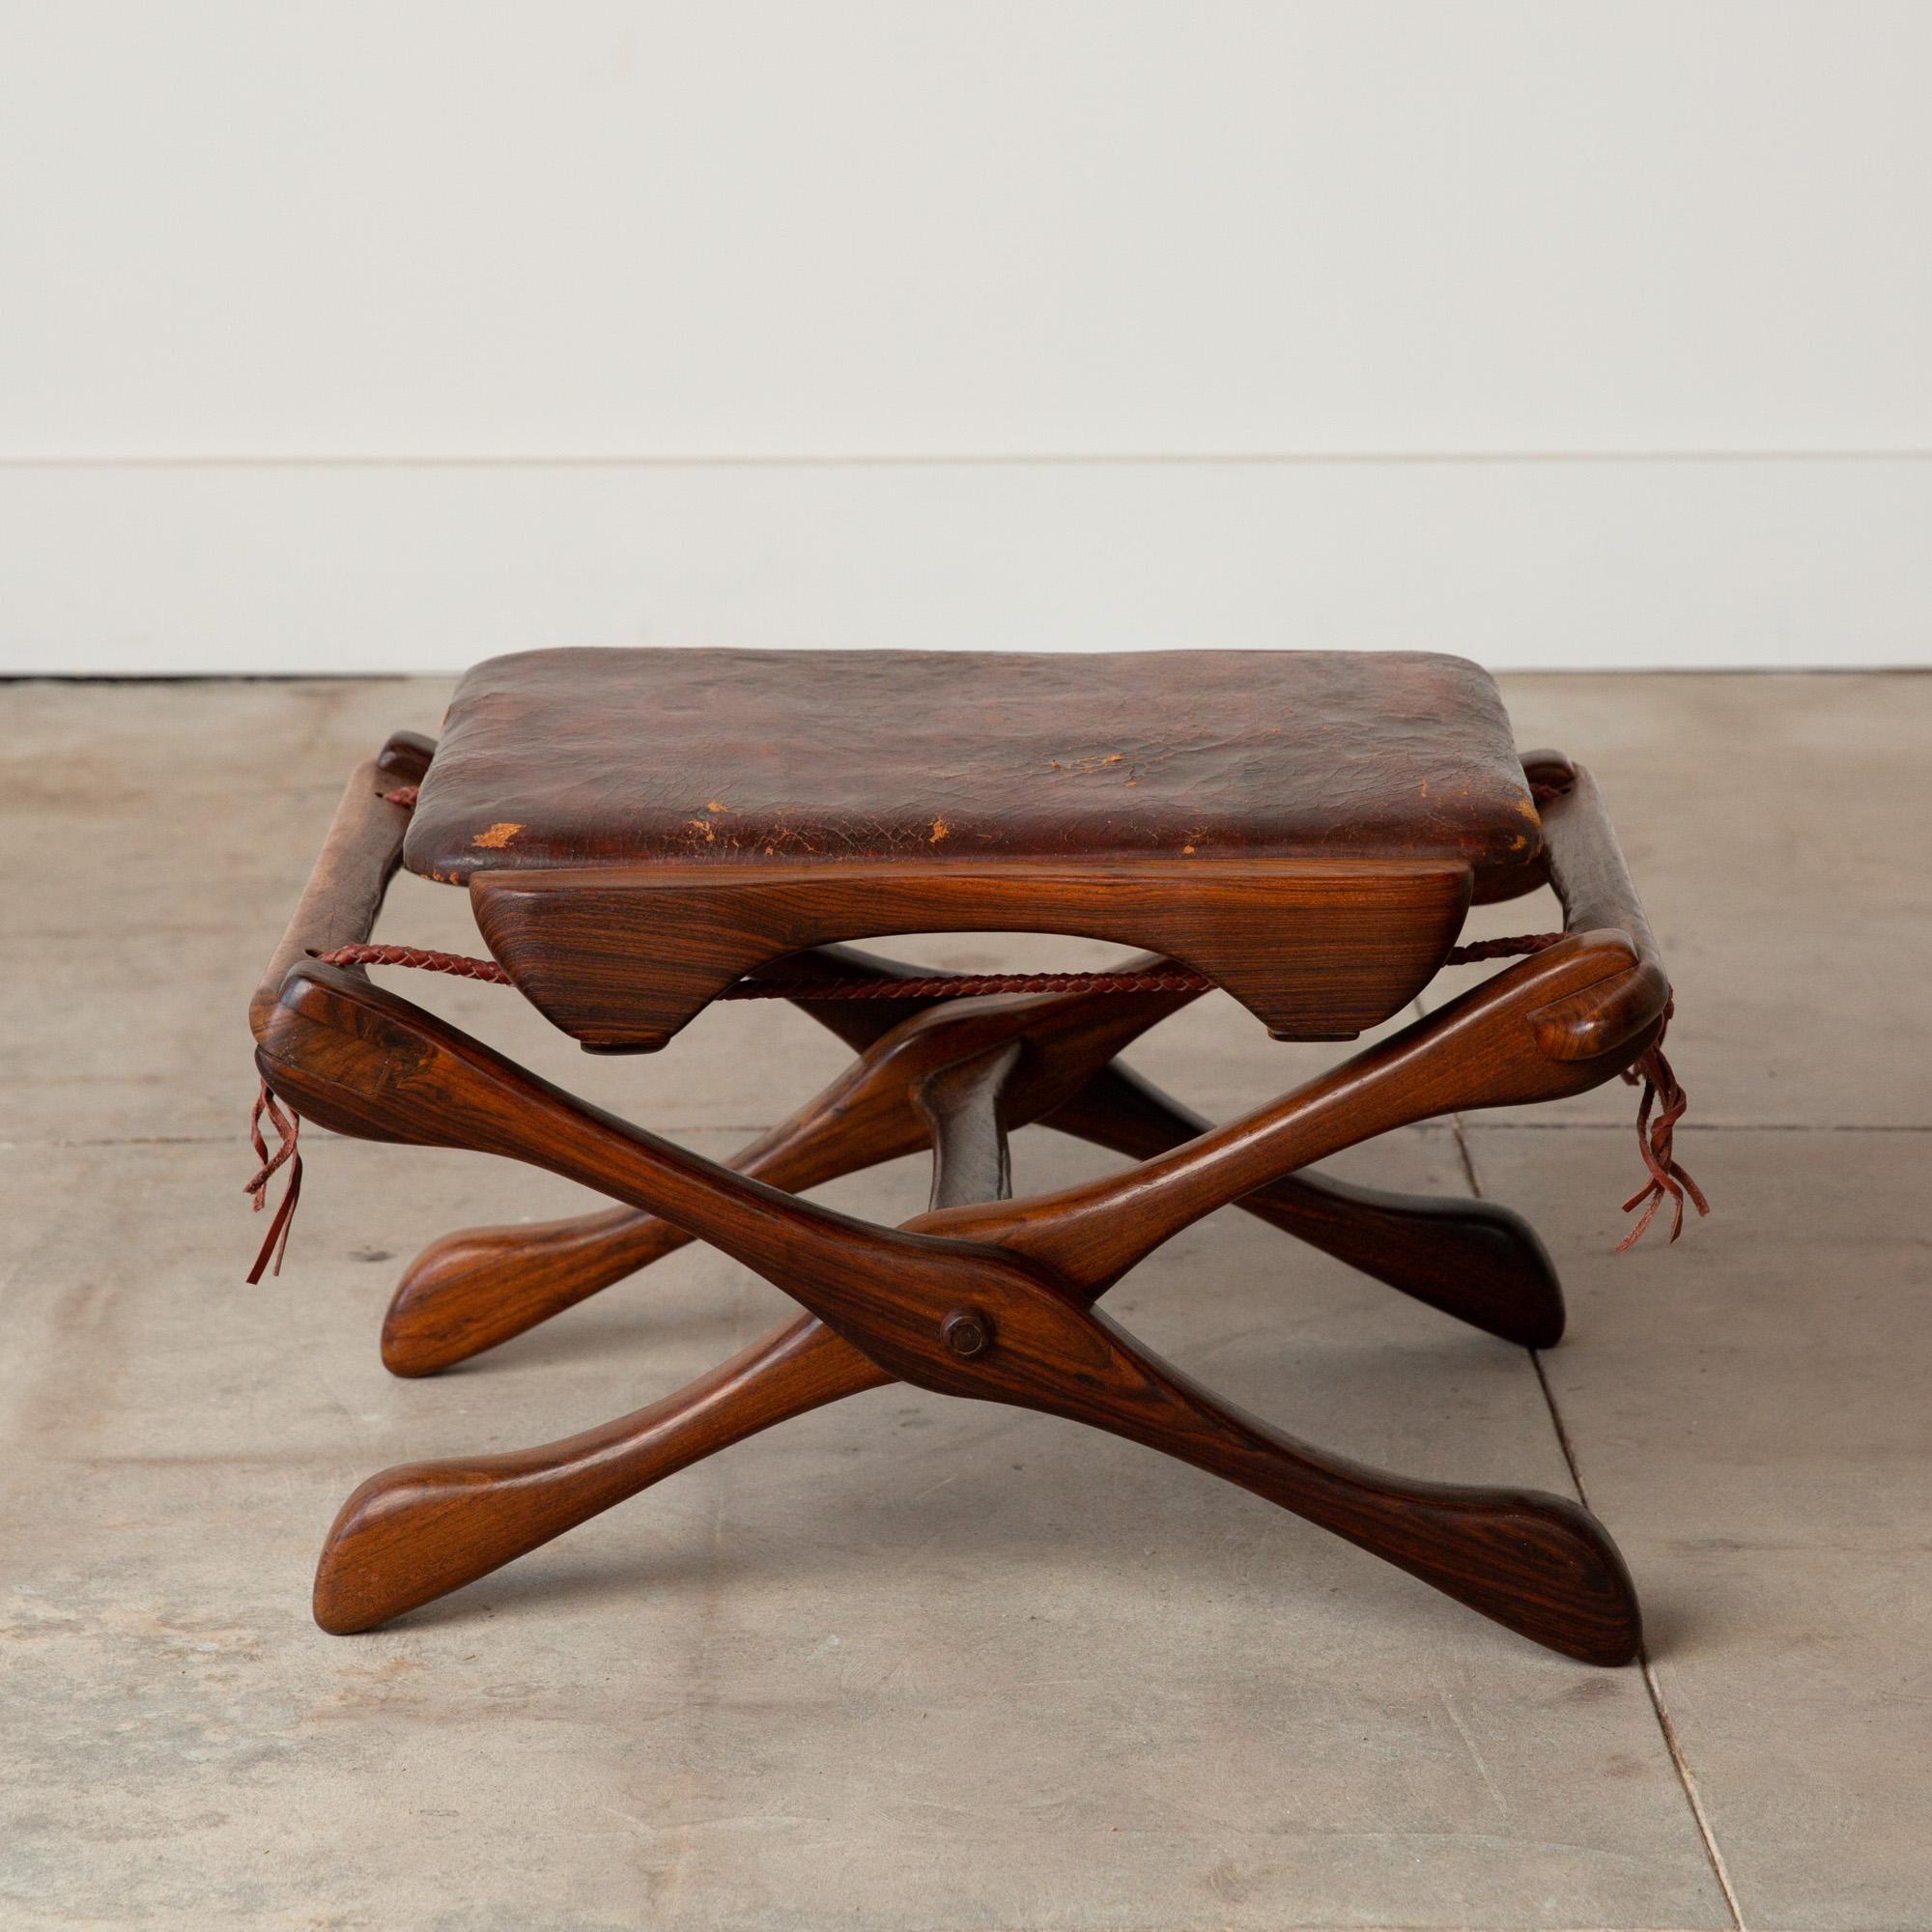 Patinated Don Shoemaker for Señal Folding Stool with Leather Seat